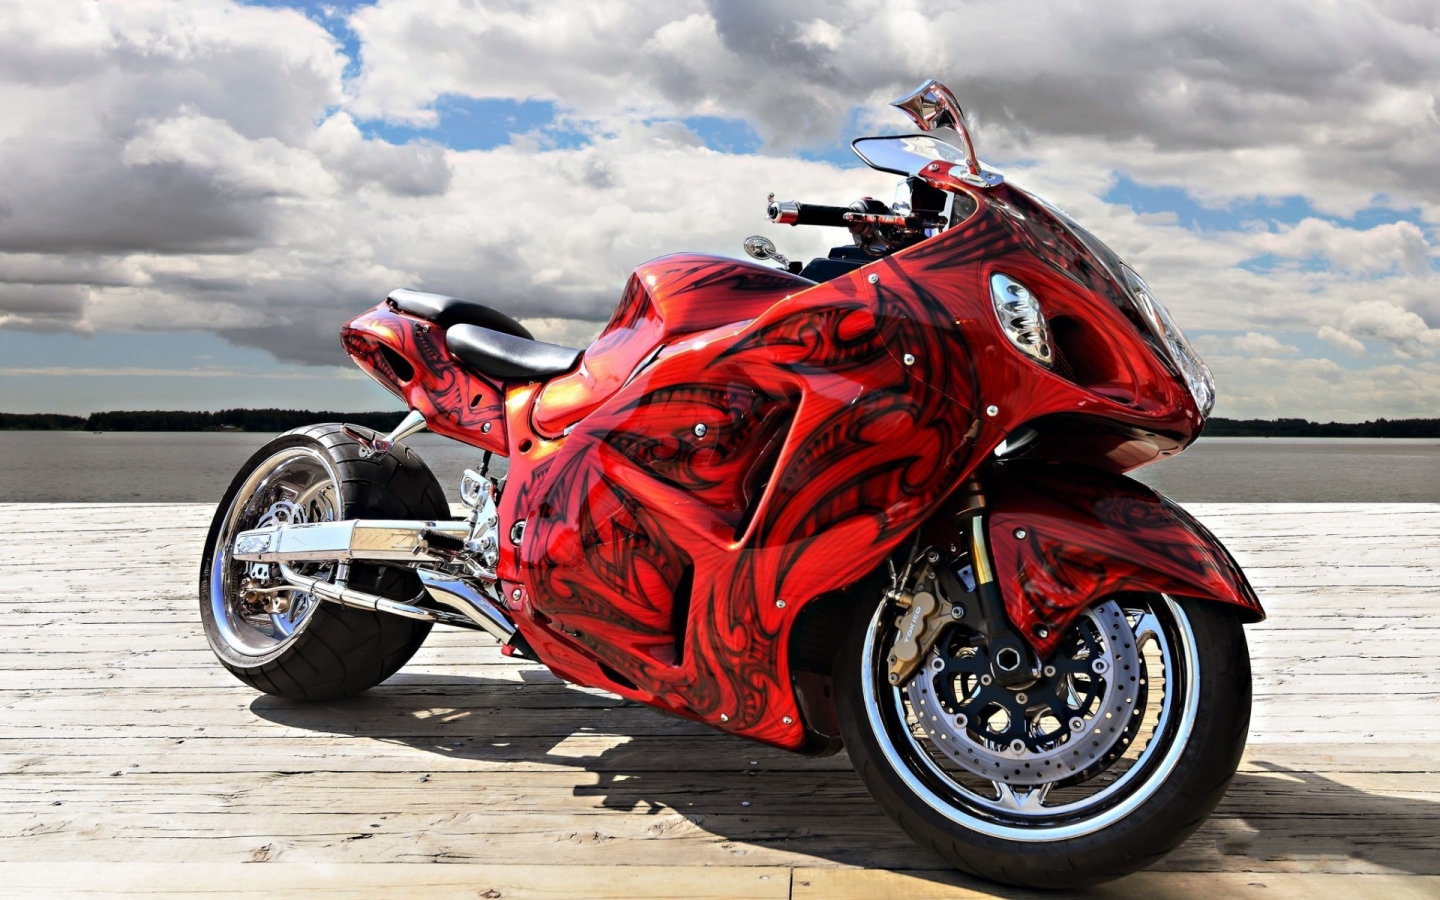 Gorgeous Red Motorcycle for 1440 x 900 widescreen resolution